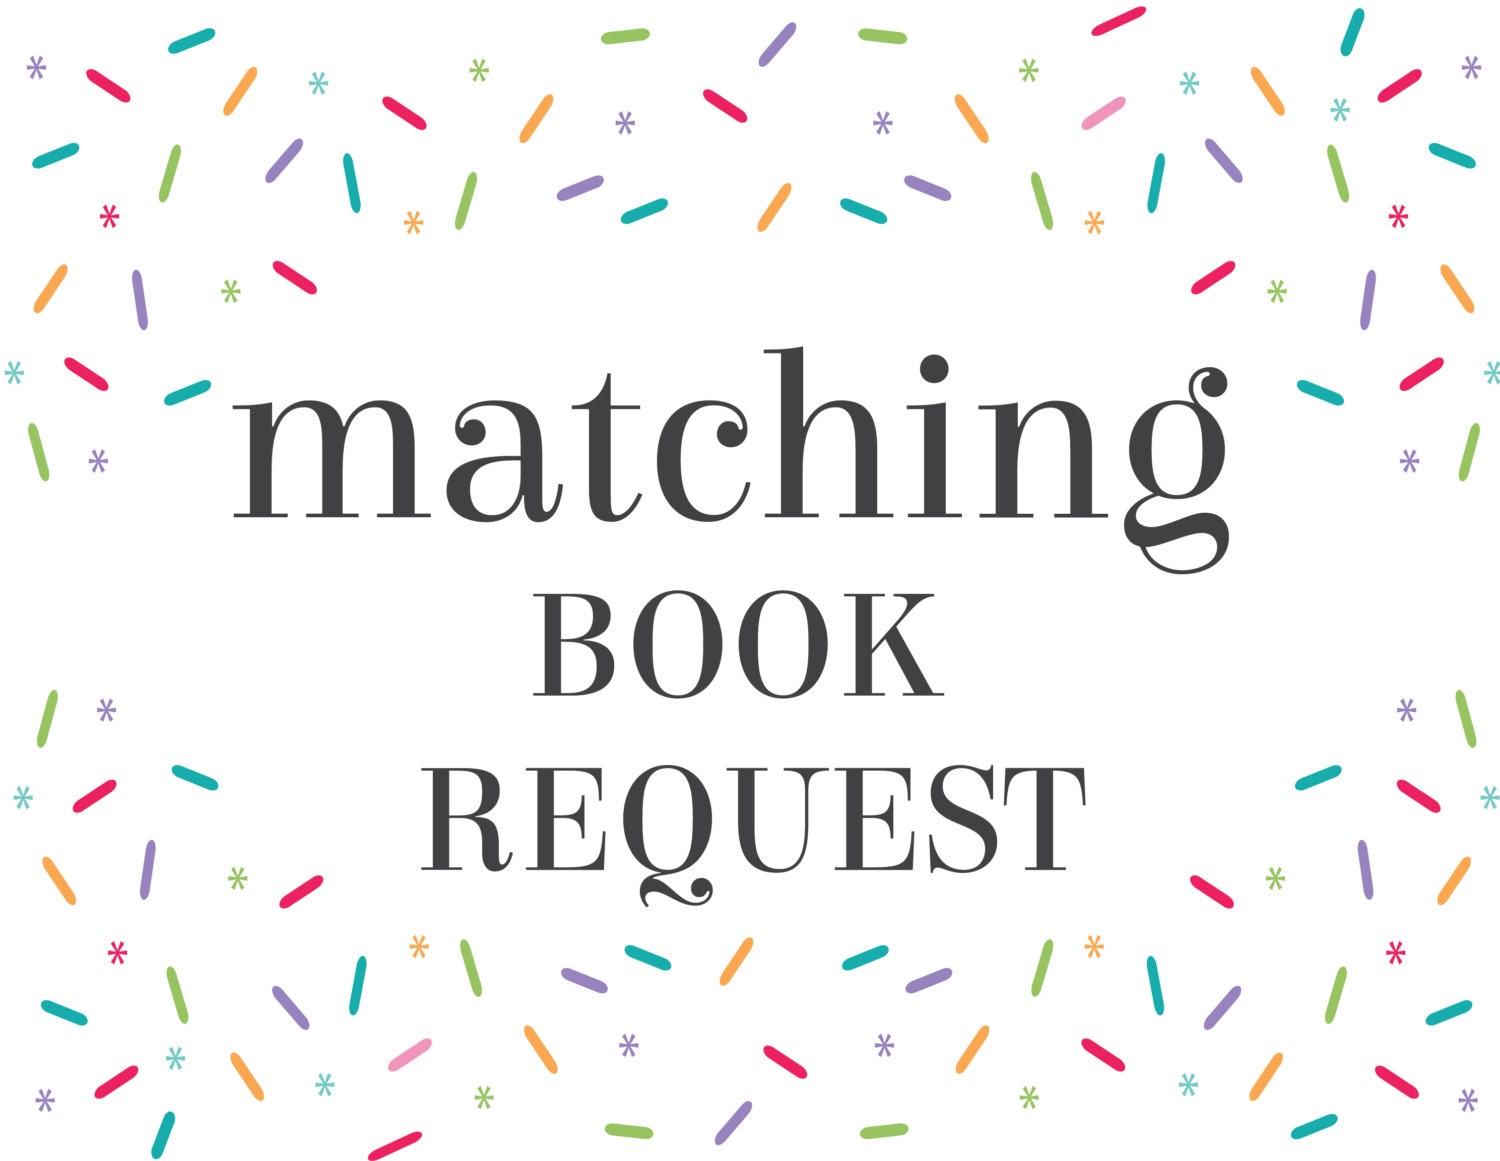 Request　Book　Matching　Etsy